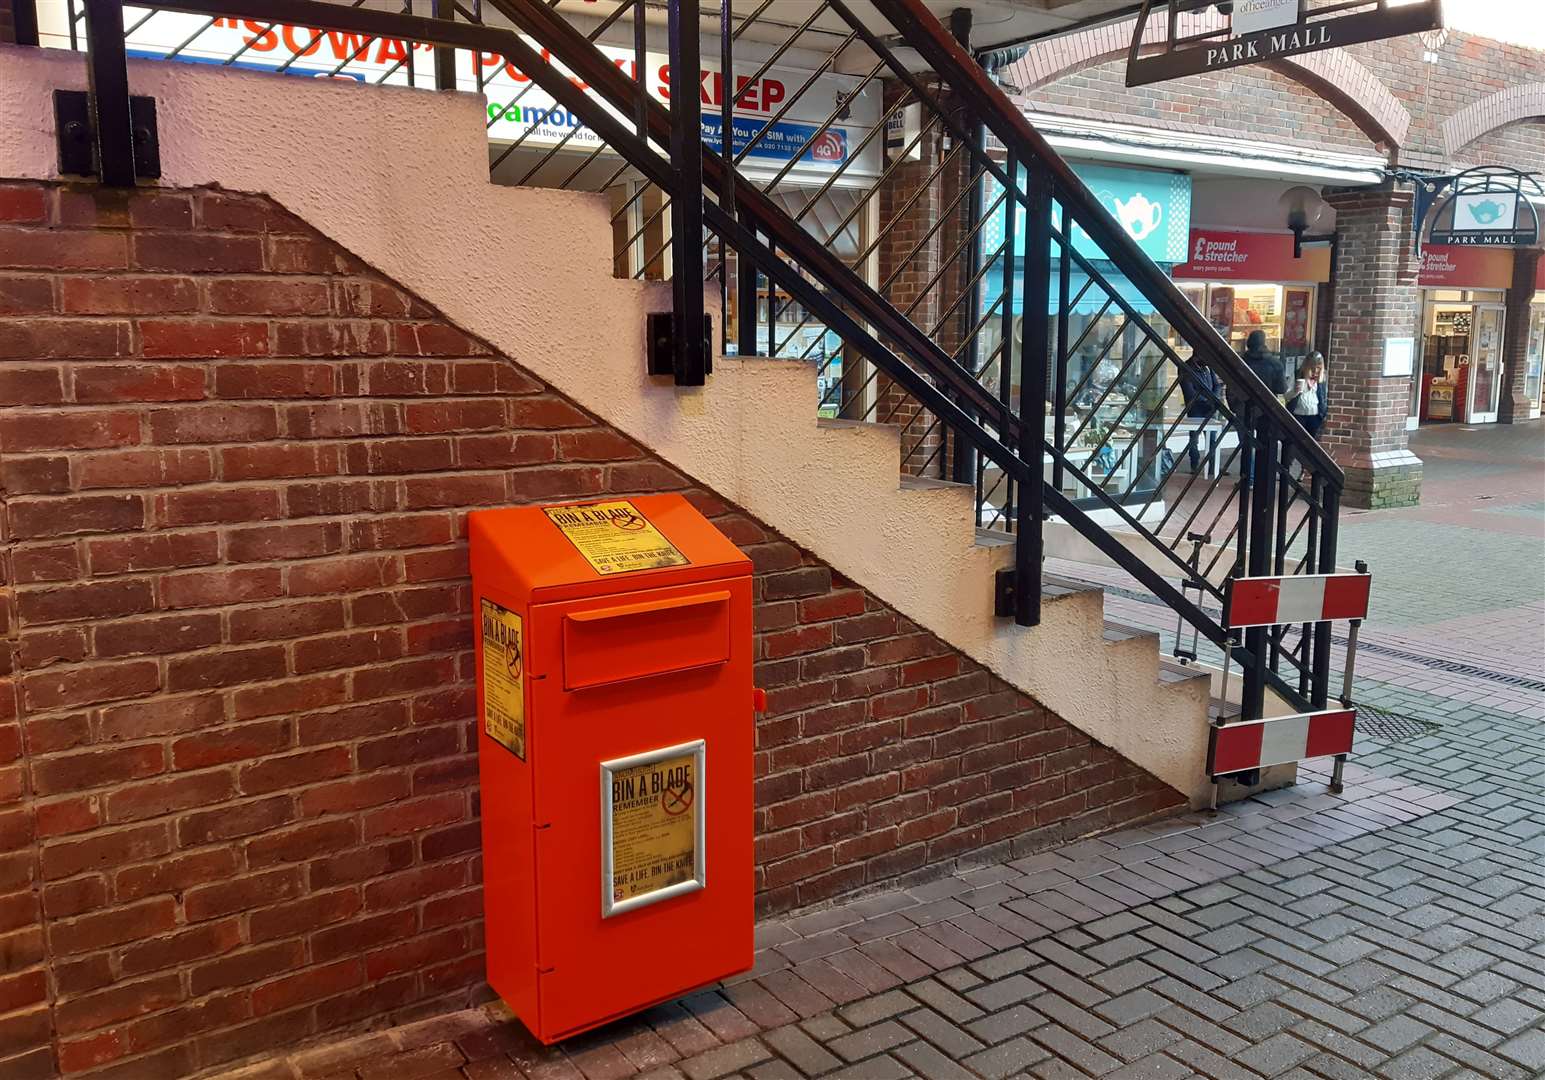 Knife bins have been installed in Ashford's town centre - including here in Park Mall close to Poundstretcher